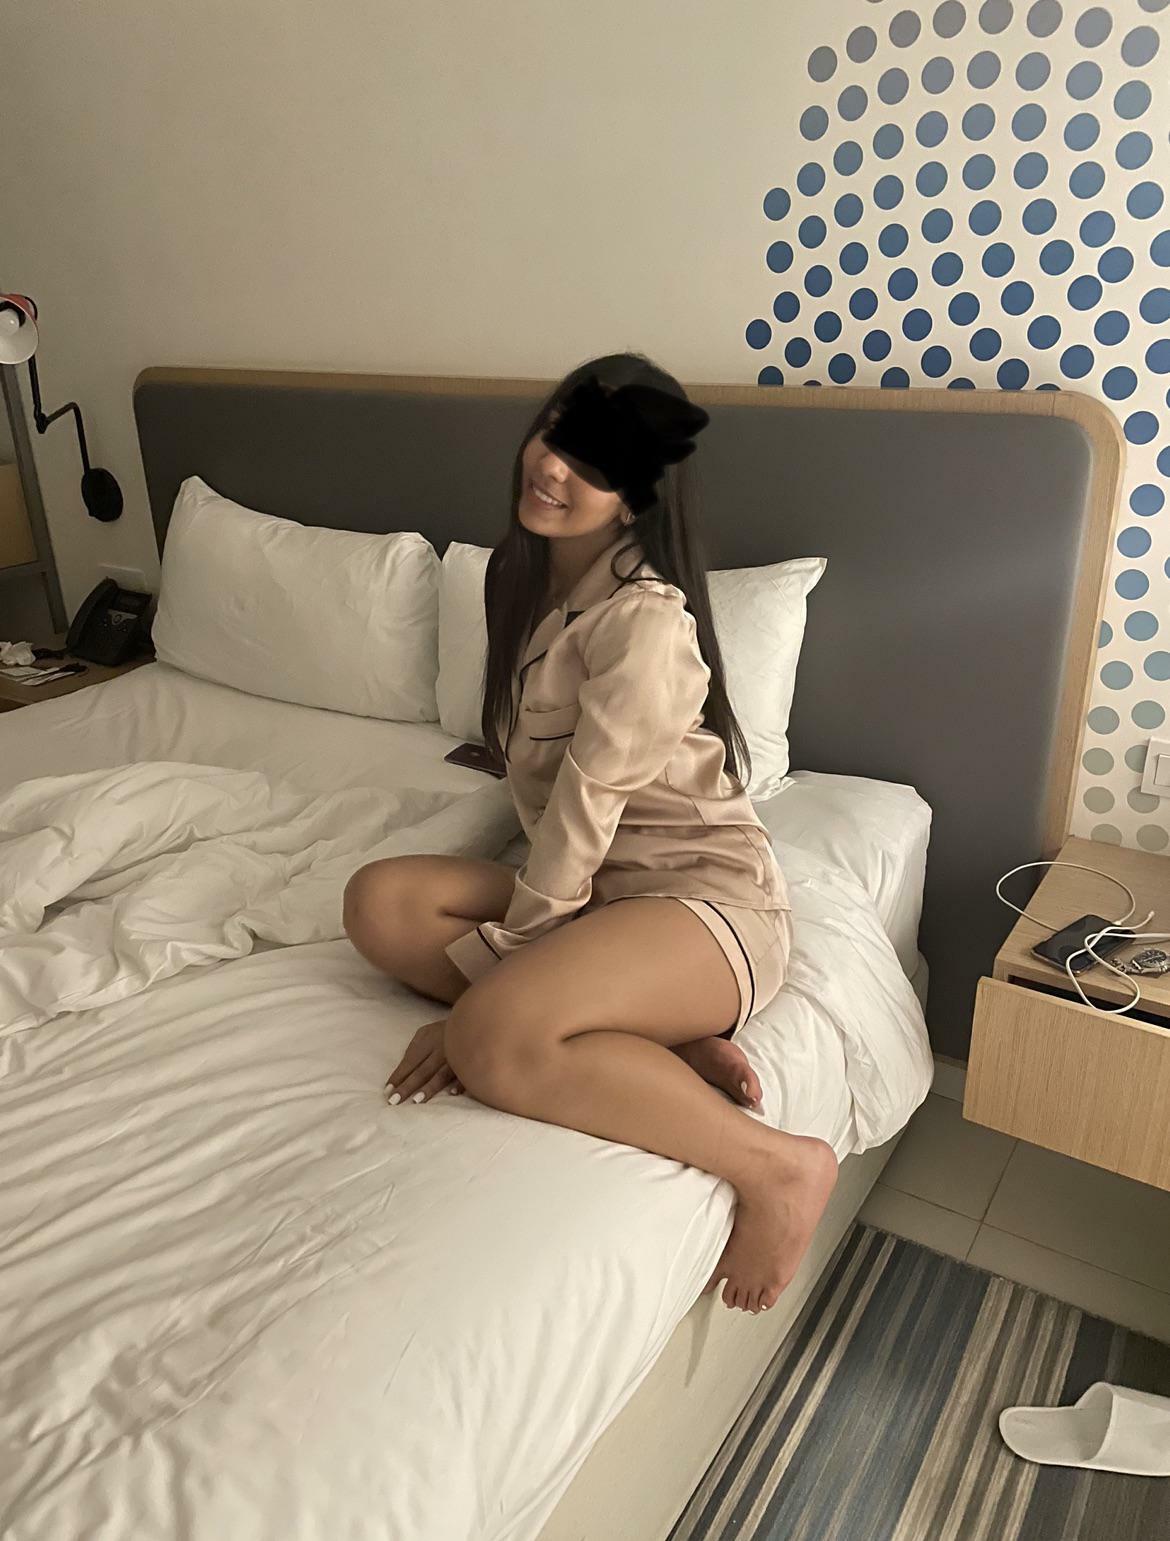 The morning after her first night with a this site bull. The first of many I hope. She has not stopped smiling this morning. 500upvotes before I release the first clip in Cuckold